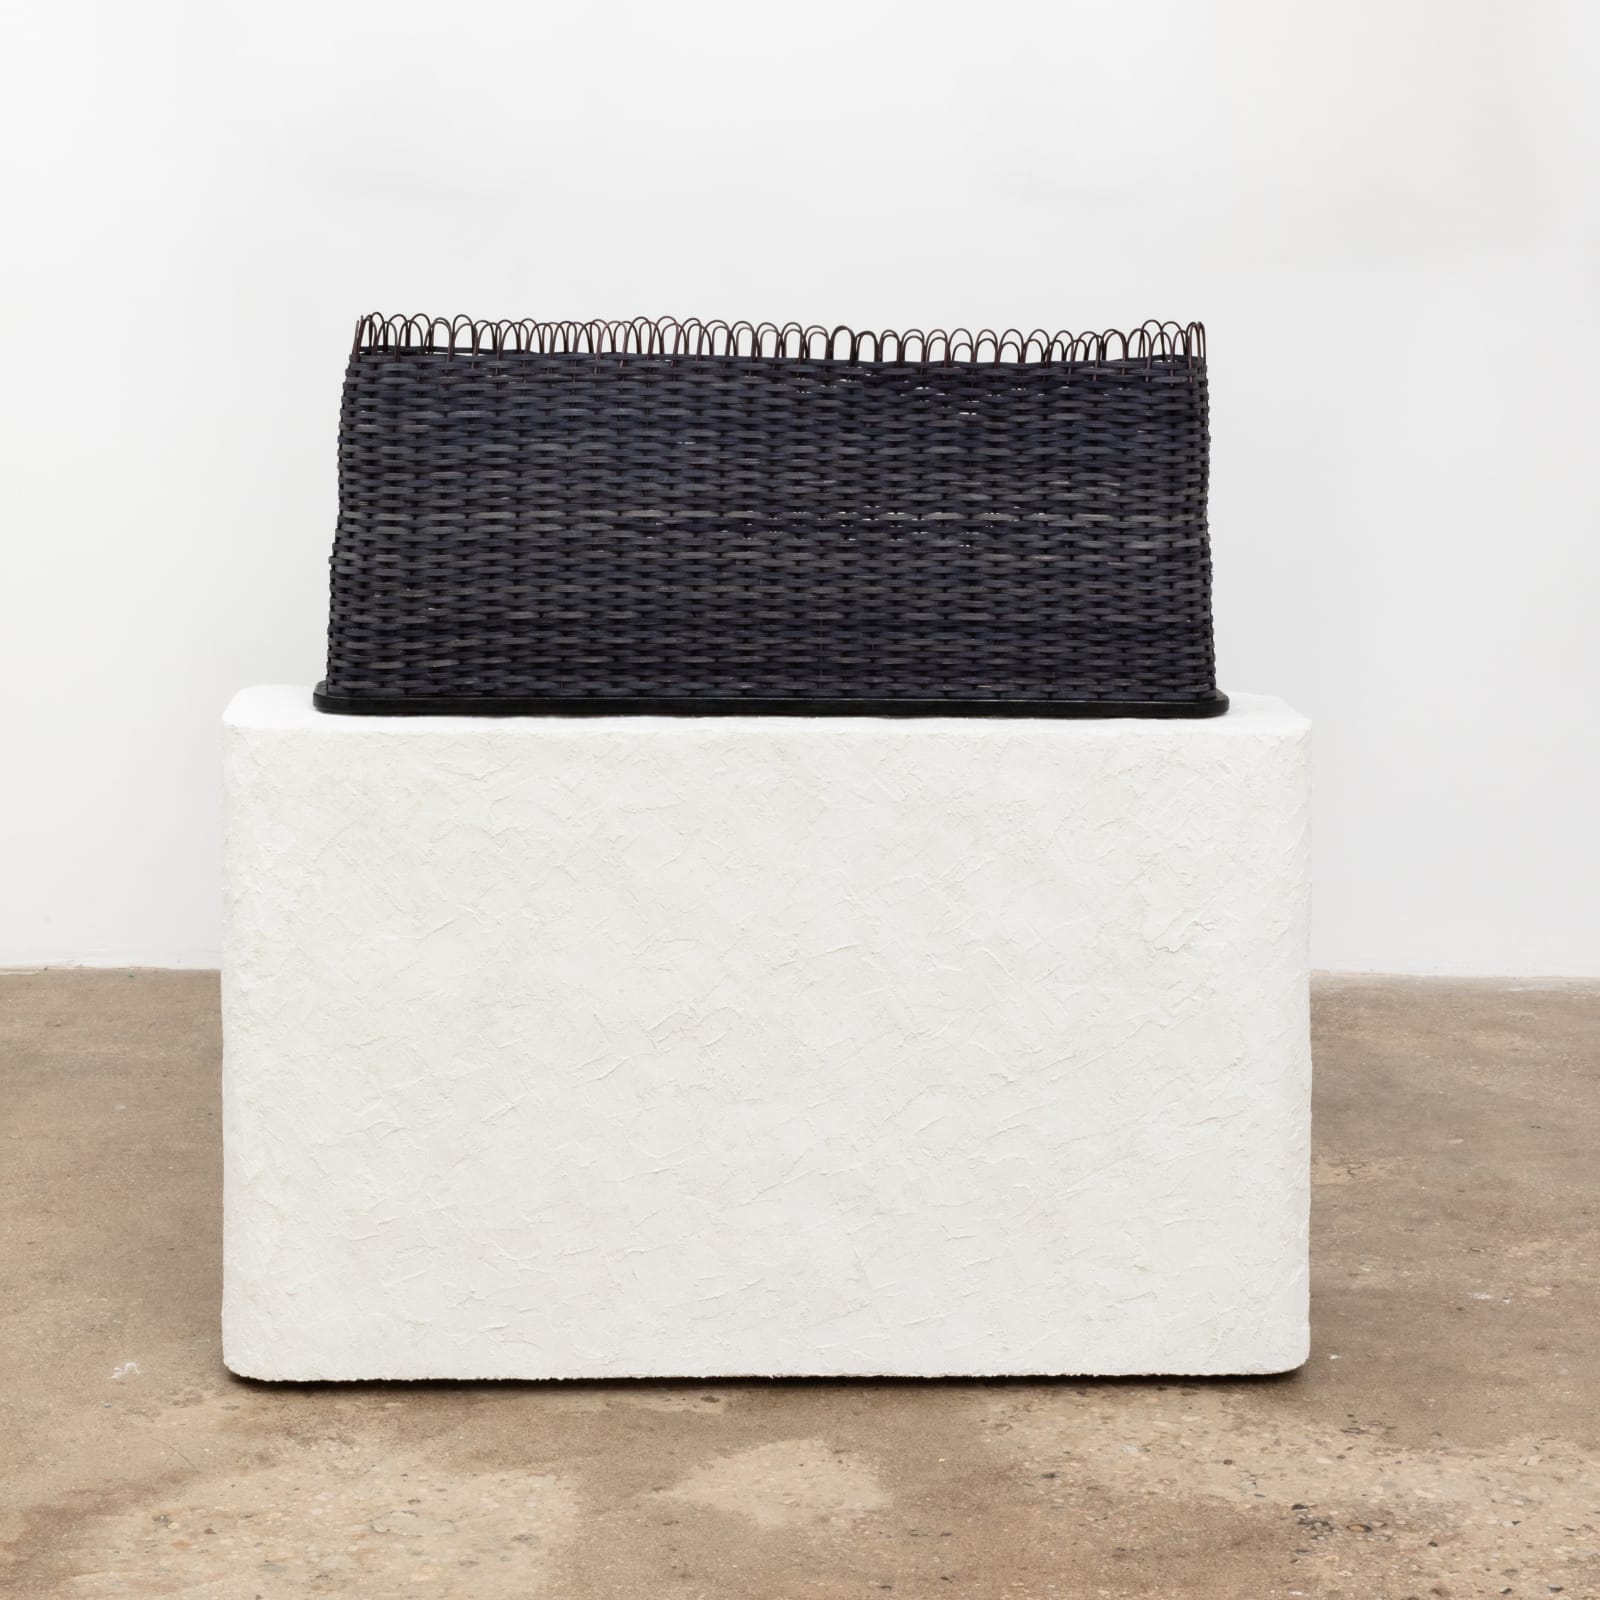 Free-standing sculpture woven with natural dyed, black reed to resemble an elongated basket, which sits atop a similar shaped white stucco pedestal base. 